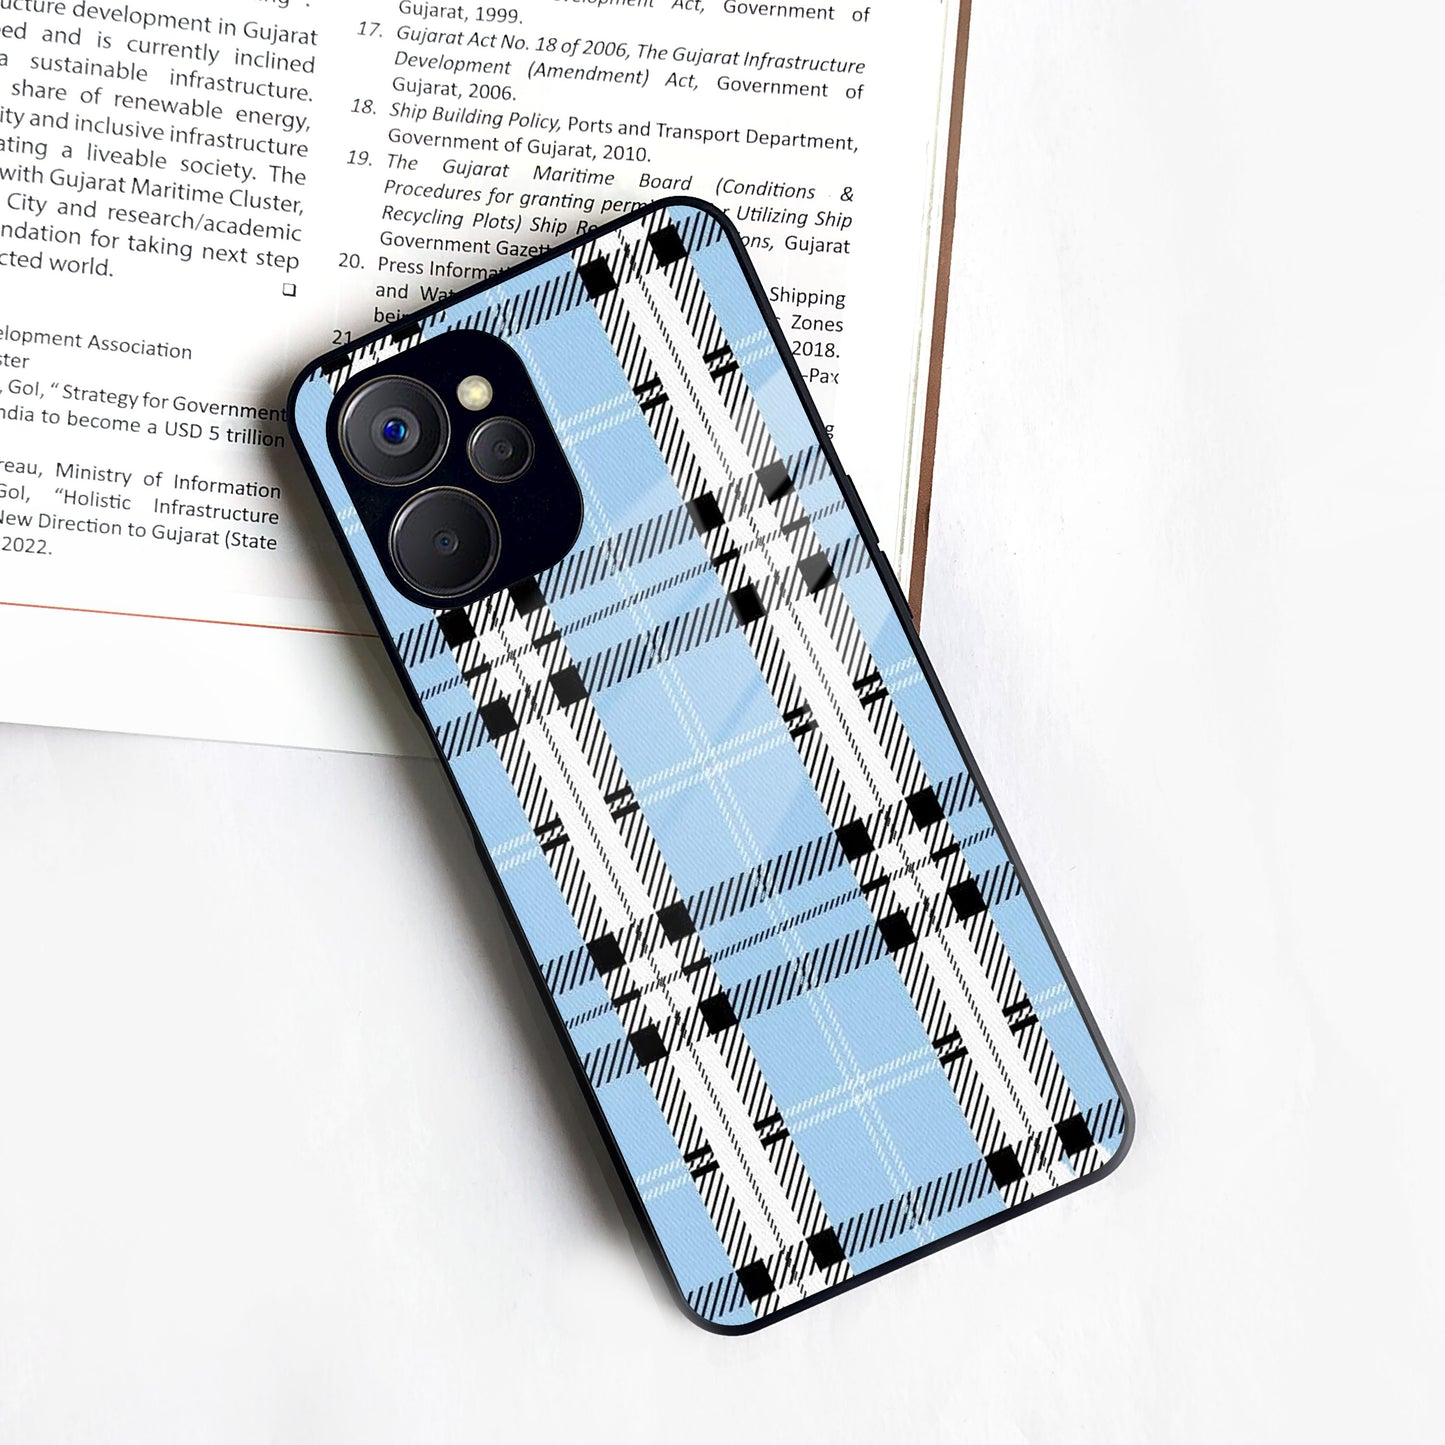 Check Glass Phone Case And Cover For Realme/Narzo